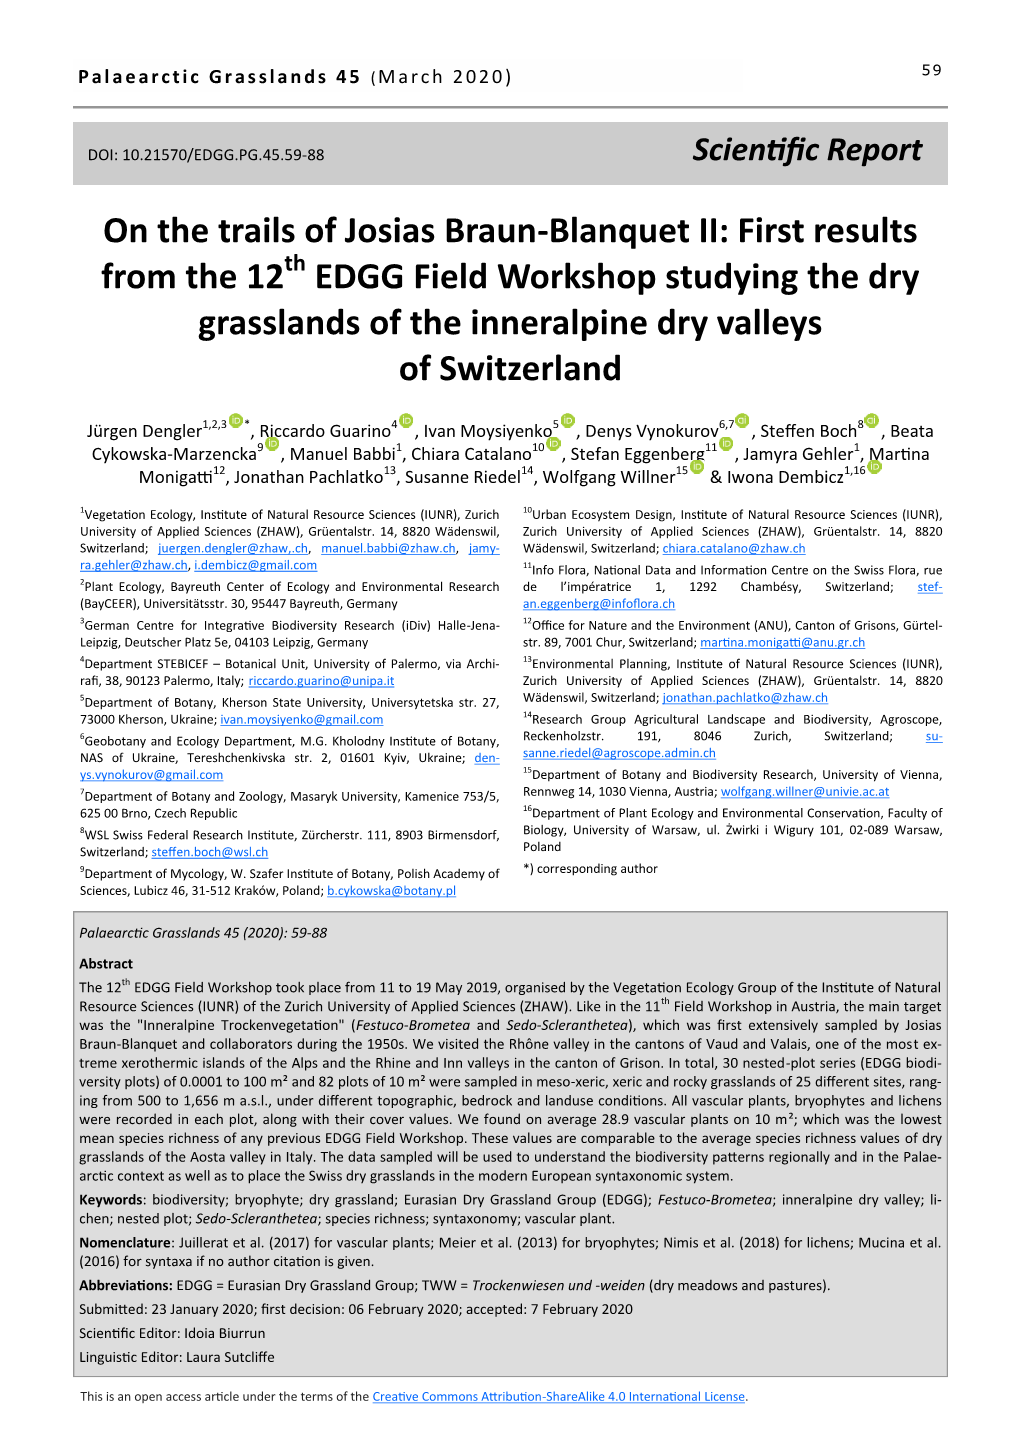 On the Trails of Josias Braun-Blanquet II: First Results from the 12Th EDGG Field Workshop Studying the Dry Grasslands of the Inneralpine Dry Valleys of Switzerland